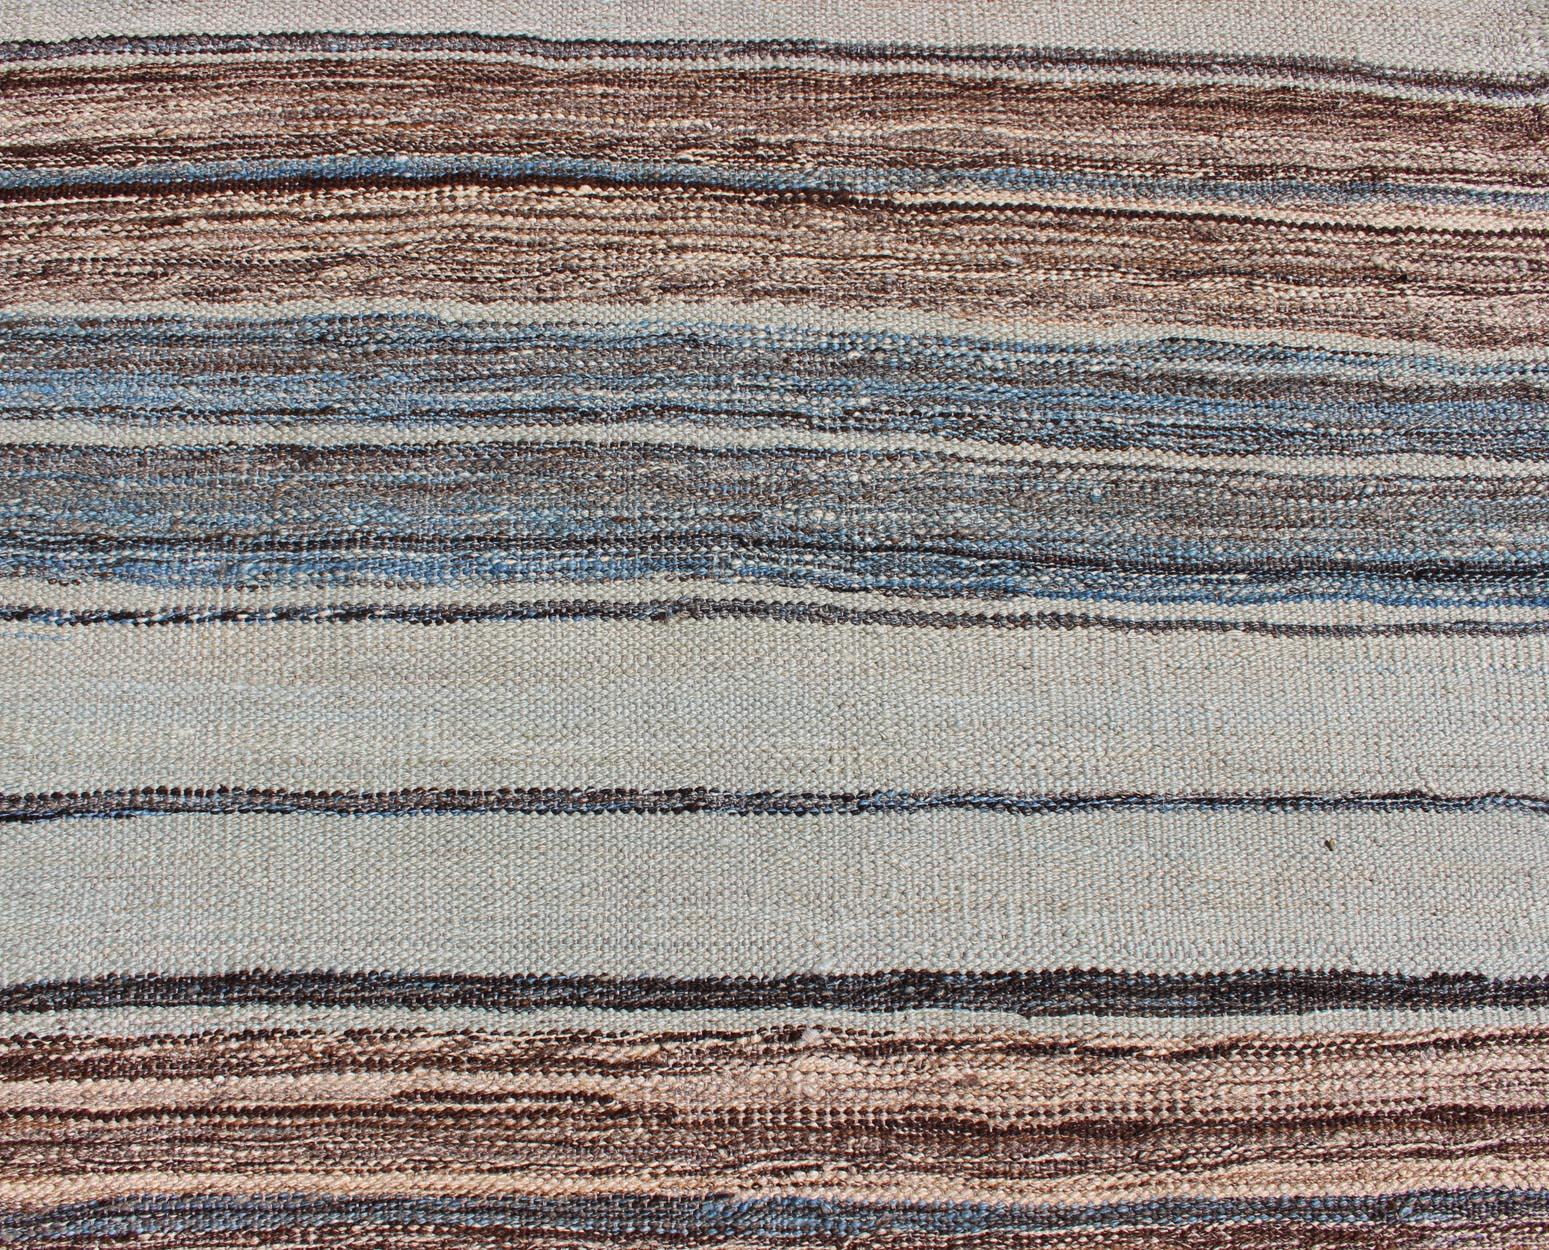 Contemporary Modern Kilim Rug with Stripes in Shades of Blue, Taupe, Brown, and Cream Runner For Sale